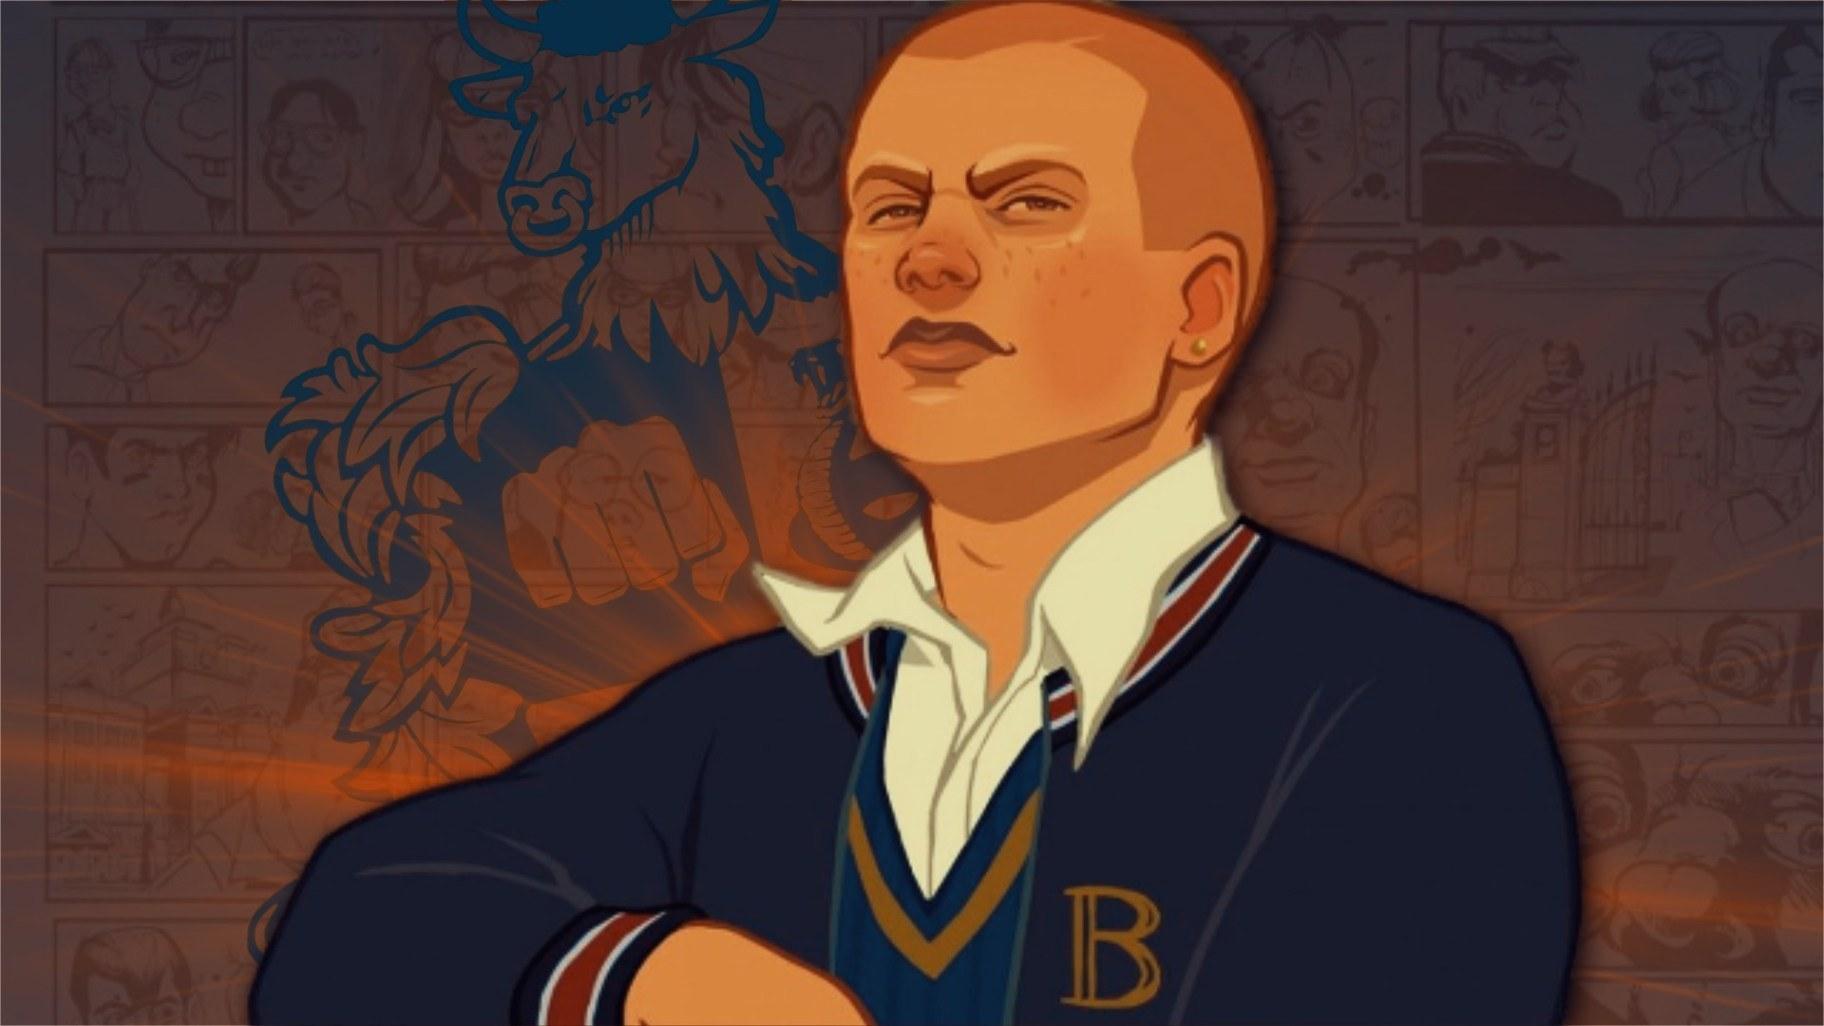 Bully 2 “Fizzled Out” After More Than a Year in Development